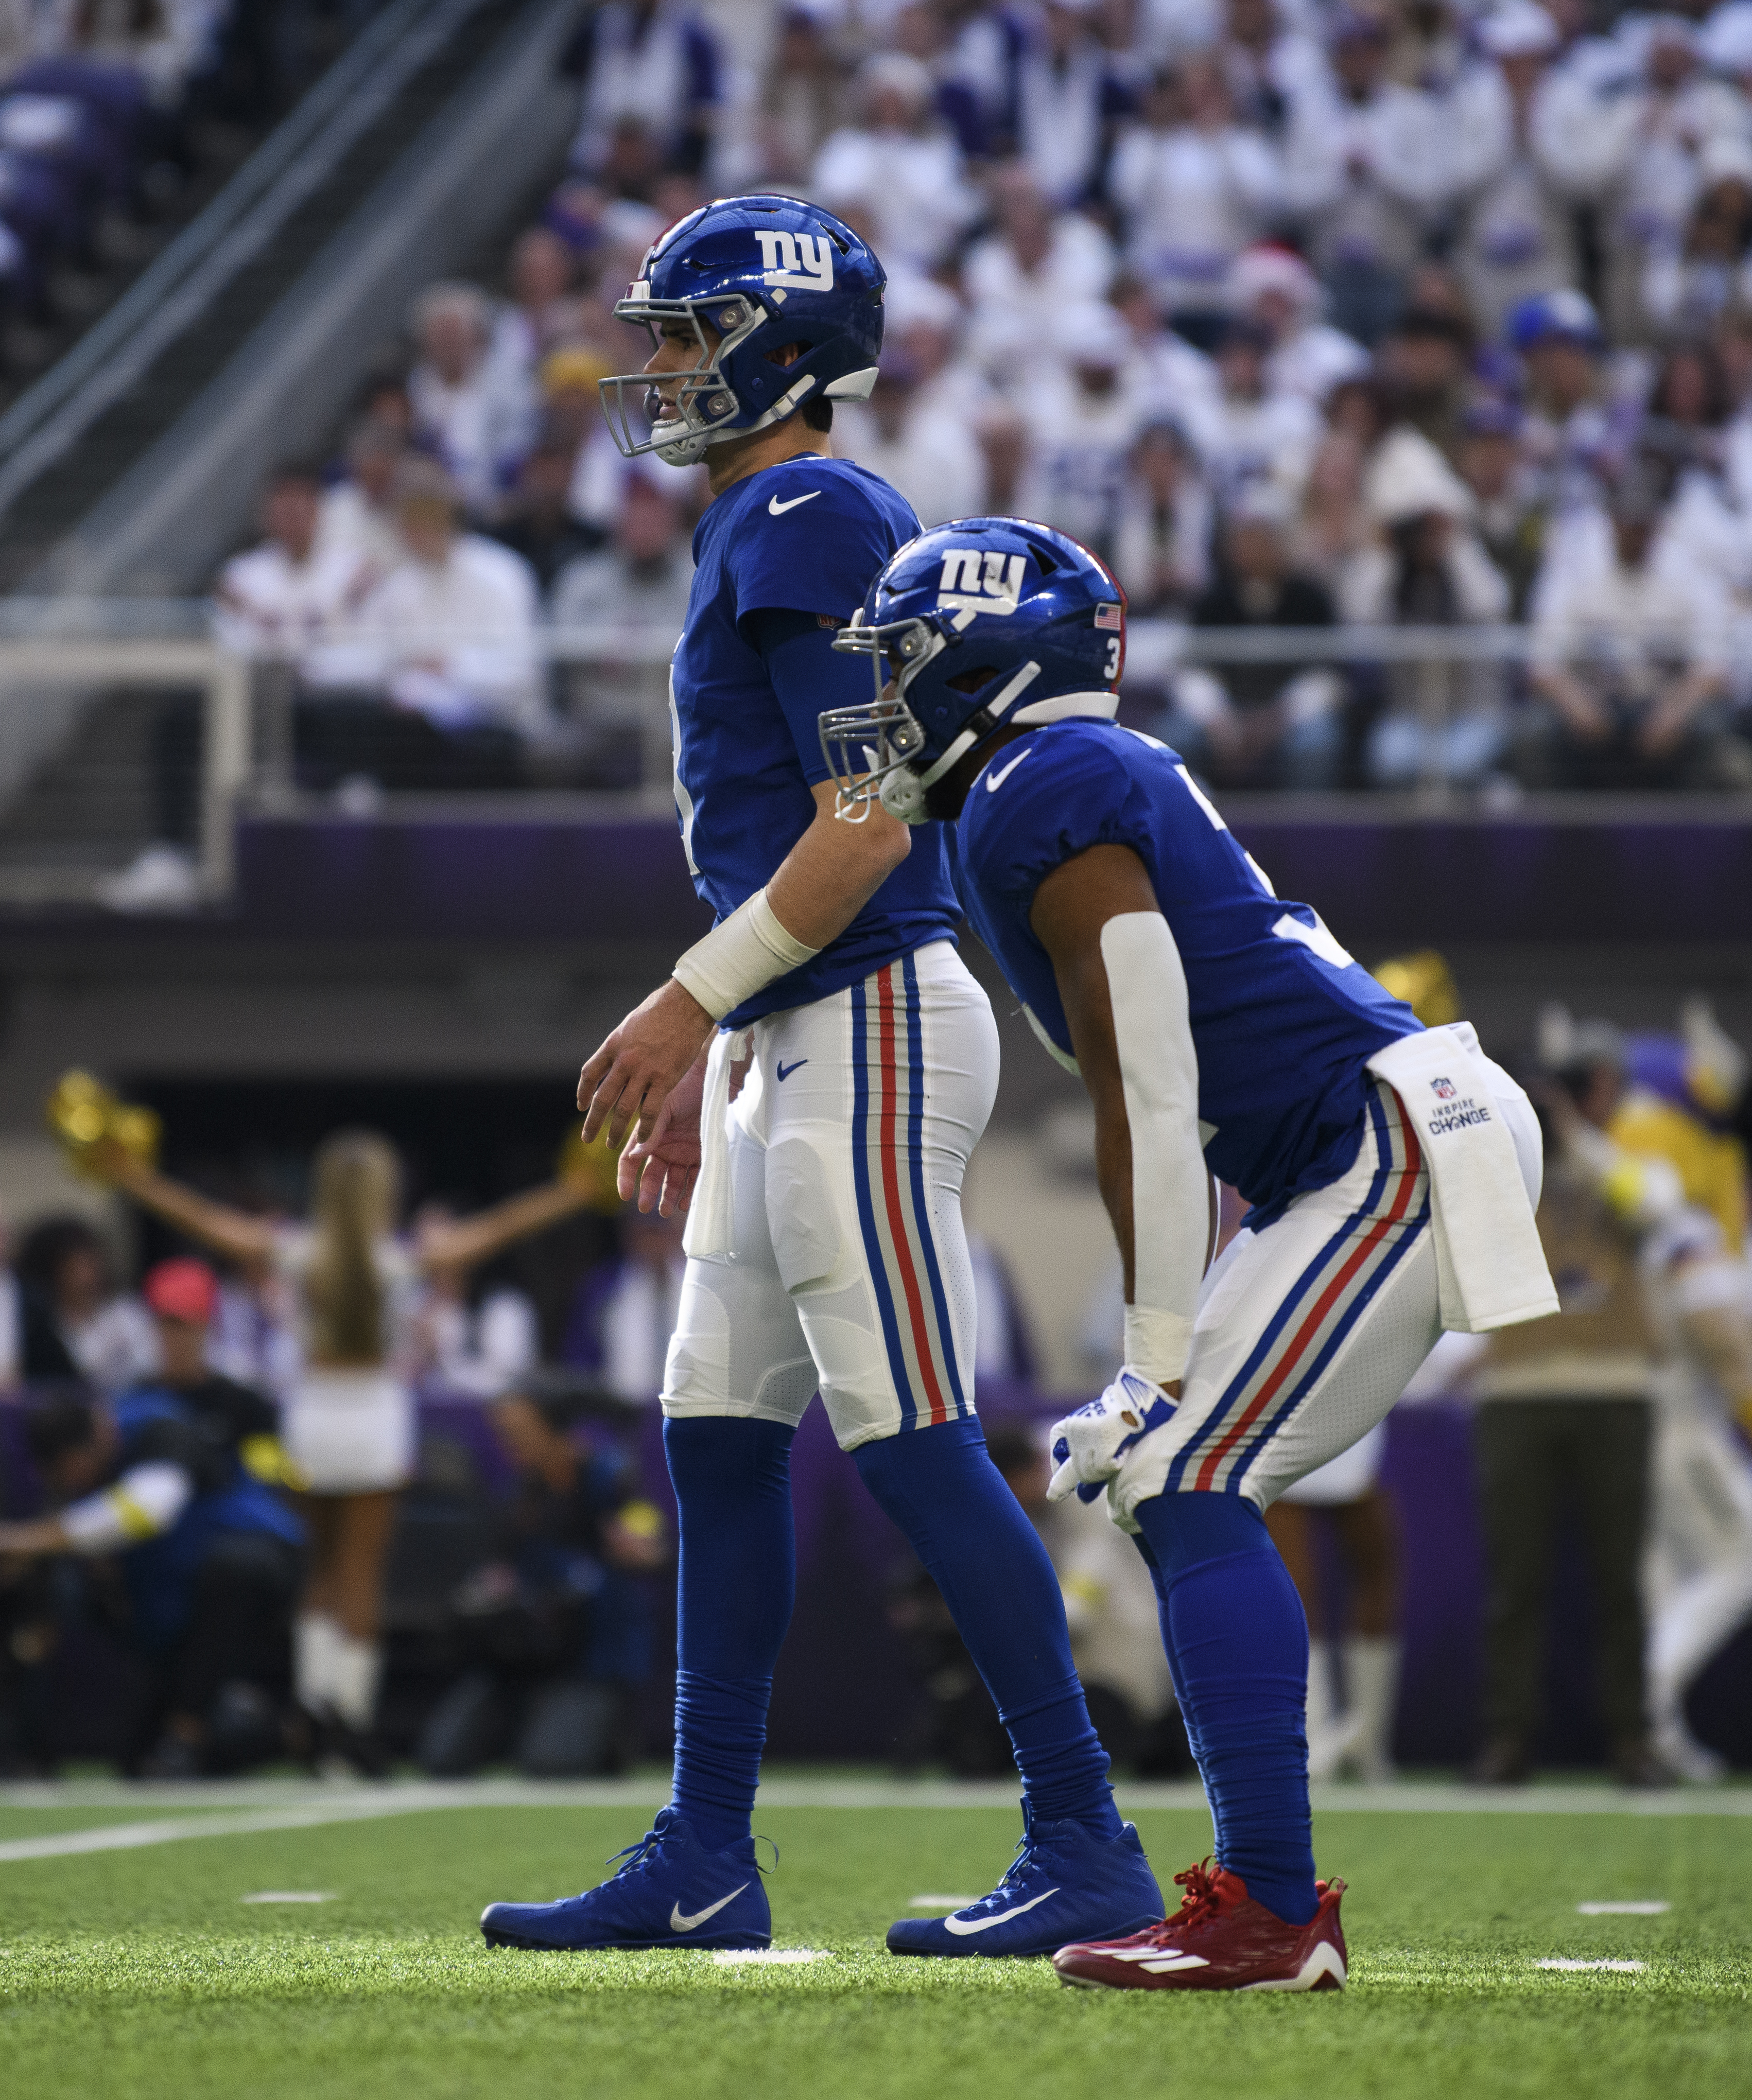 Daniel Jones #8 of the New York Giants lines up for a play in the first quarter of the game against the Minnesota Vikings at U.S. Bank Stadium on December 24, 2022 in Minneapolis, Minnesota.